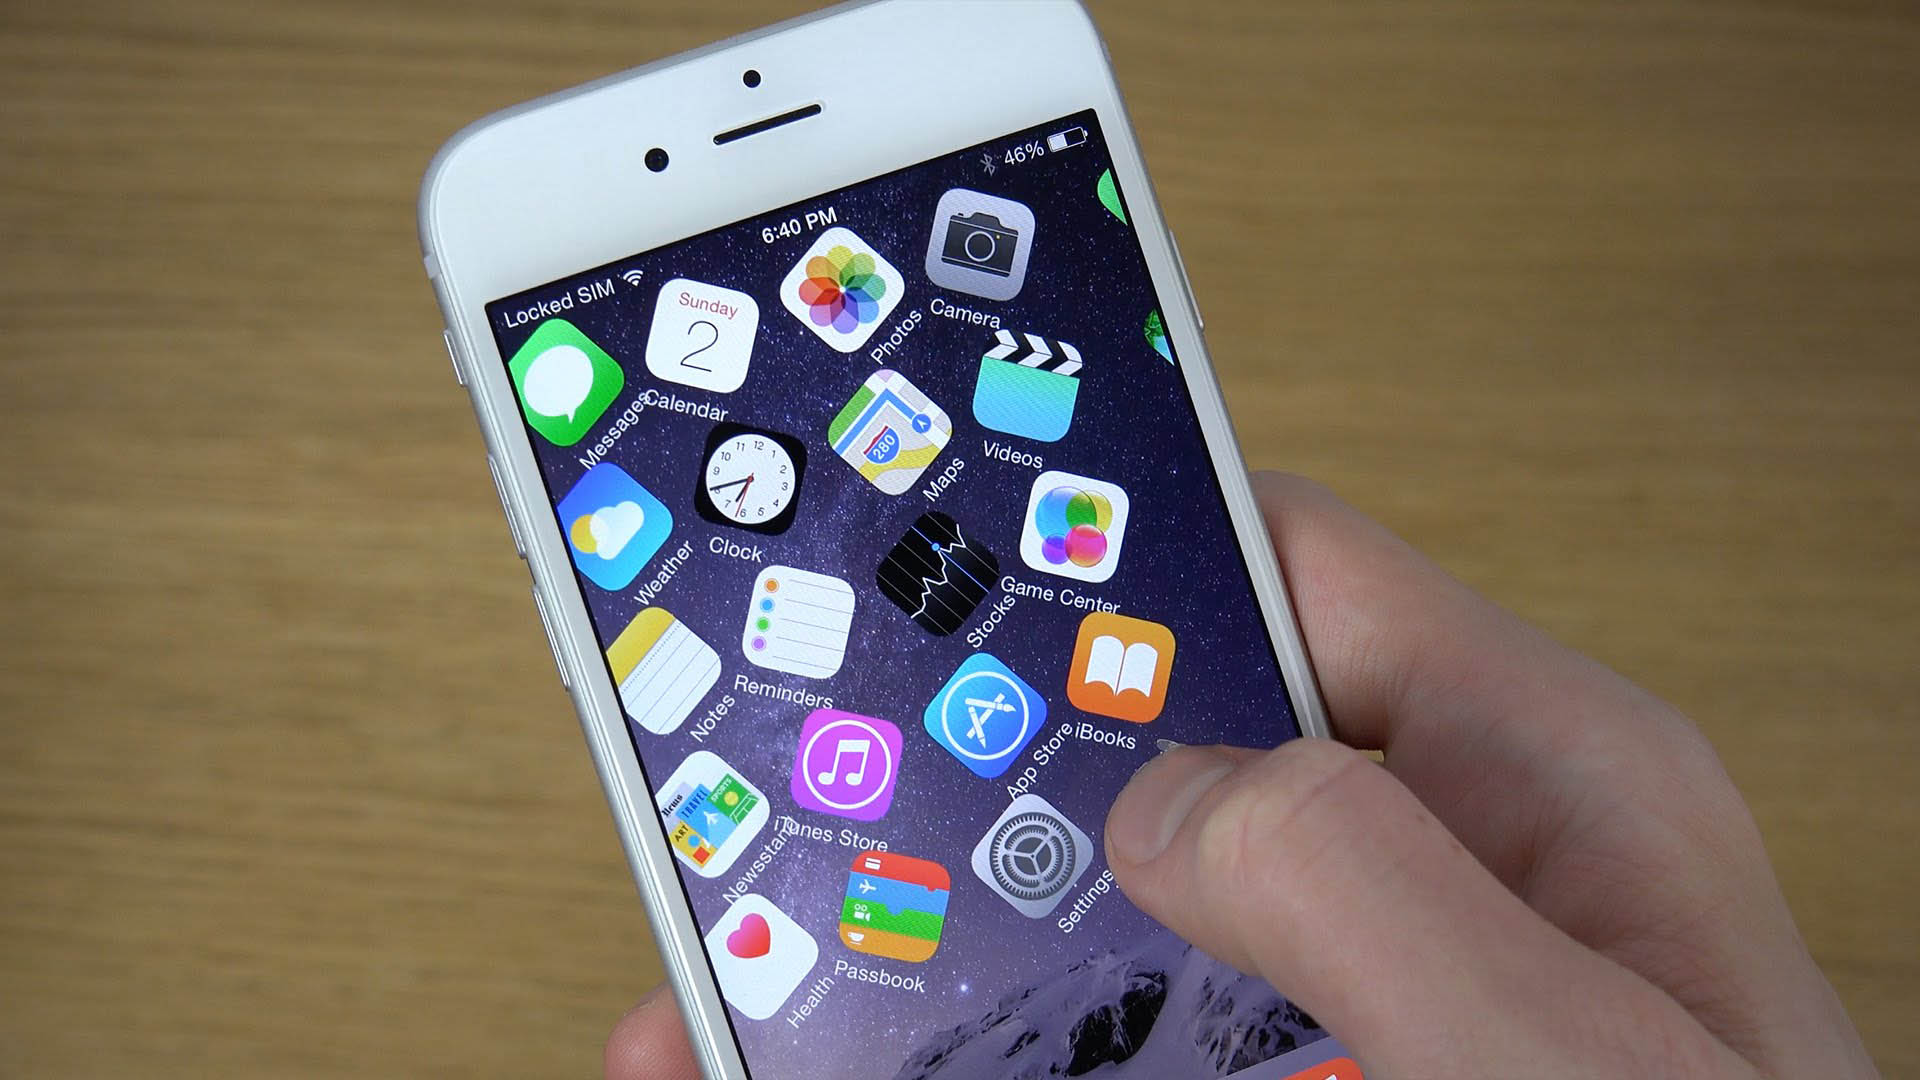 You can now jailbreak iOS 9.3.3 and this video will show you how